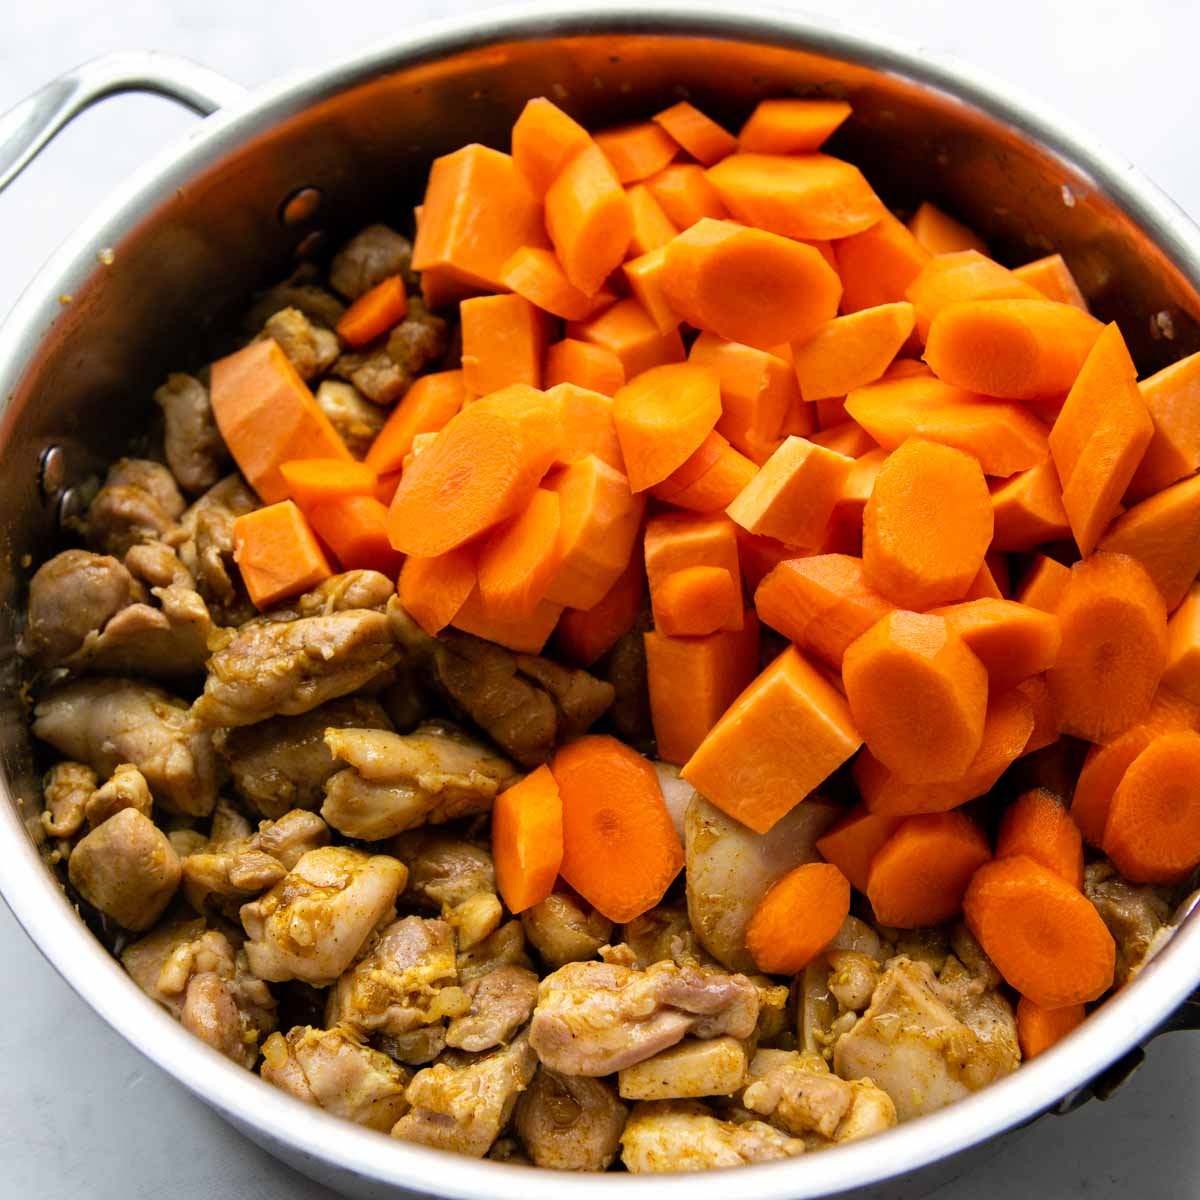 carrots and sweet potatoes cooked with chicken.